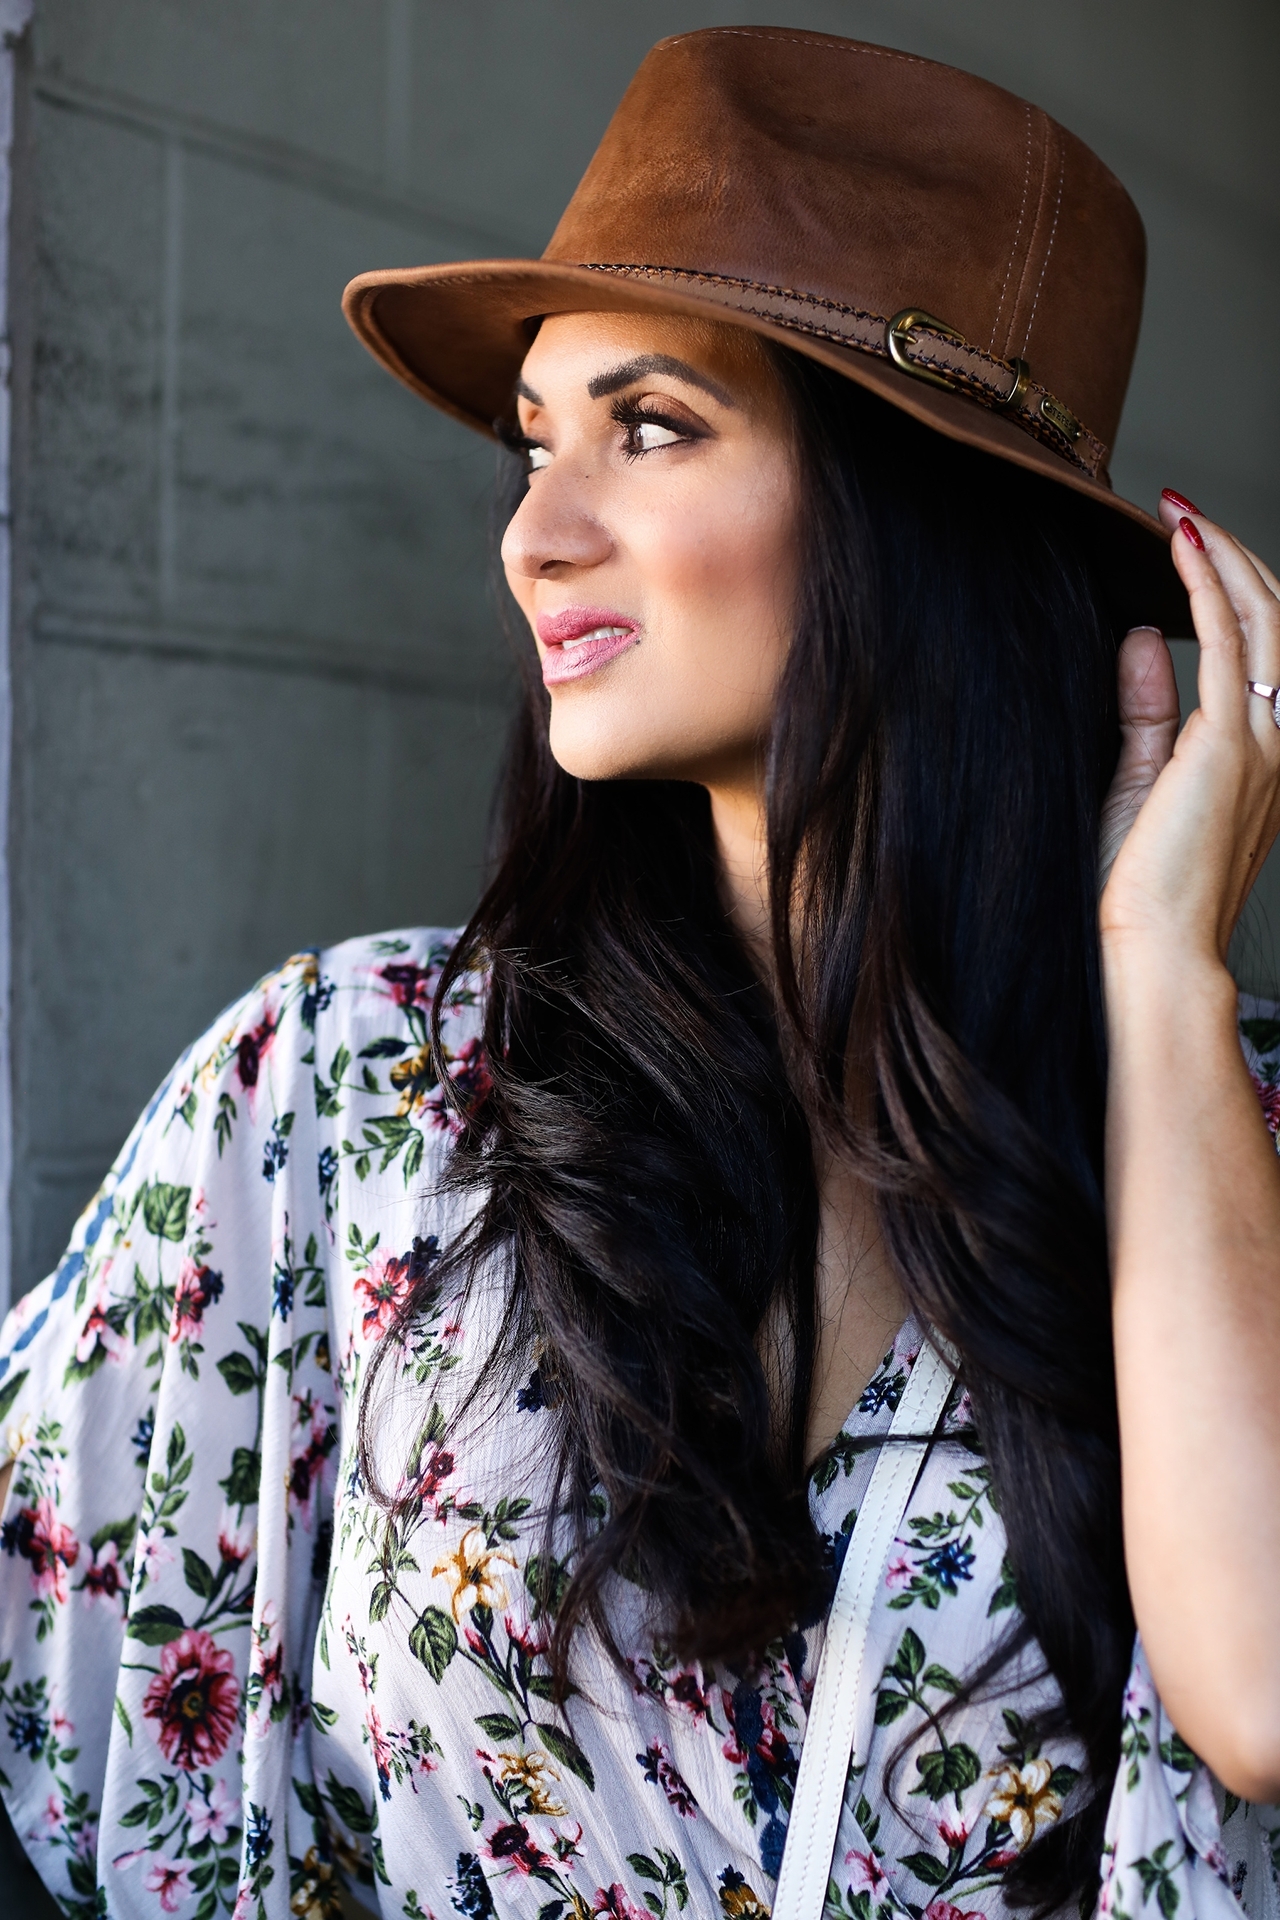 Curious when to actually wear a hat and how to style a hat like a pro? Orange County Blogger Debbie Savage is sharing her top tips here!